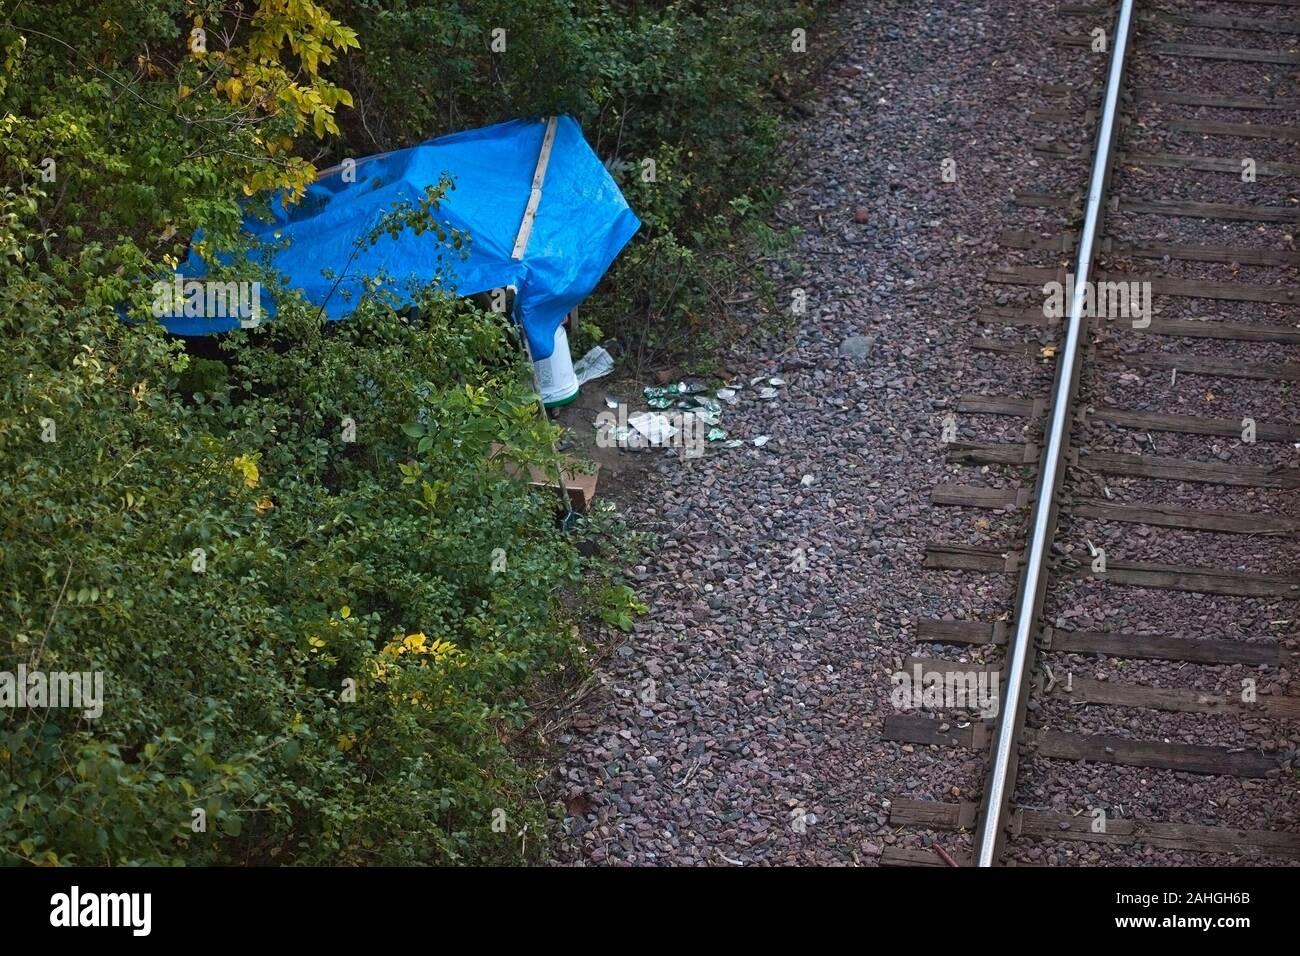 A temporary homeless shelter with a blue plastic tarp for a roof alongside a railroad track Stock Photo